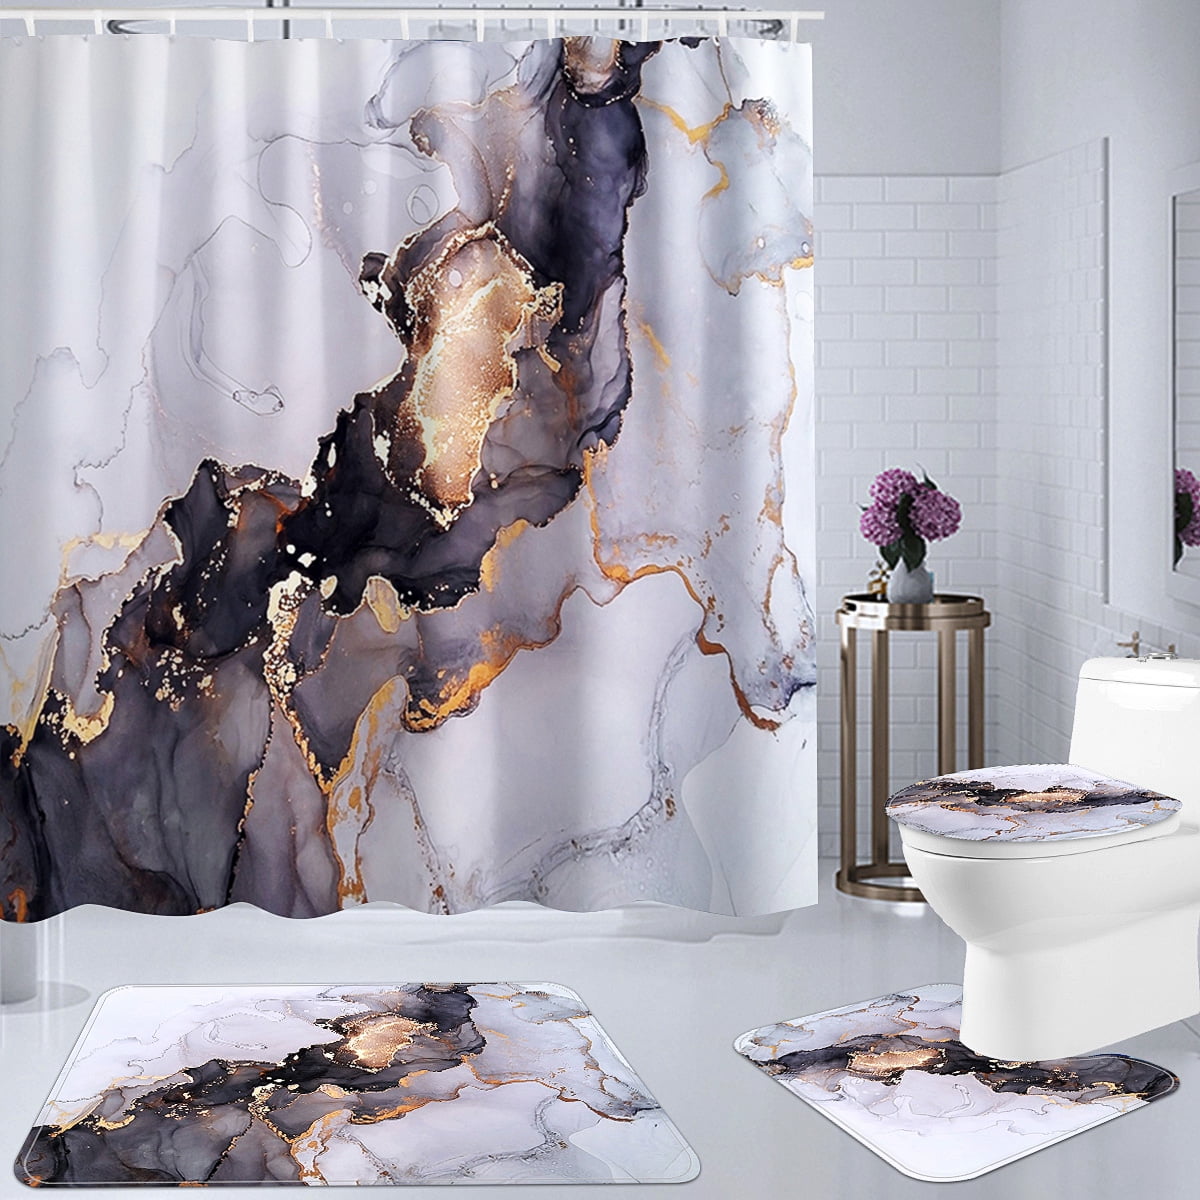 Alishomtll 4 Pcs Mushroom Shower Curtain Sets with Non-Slip Rug, Toilet Lid  Cover and Bath Mat, Plan…See more Alishomtll 4 Pcs Mushroom Shower Curtain